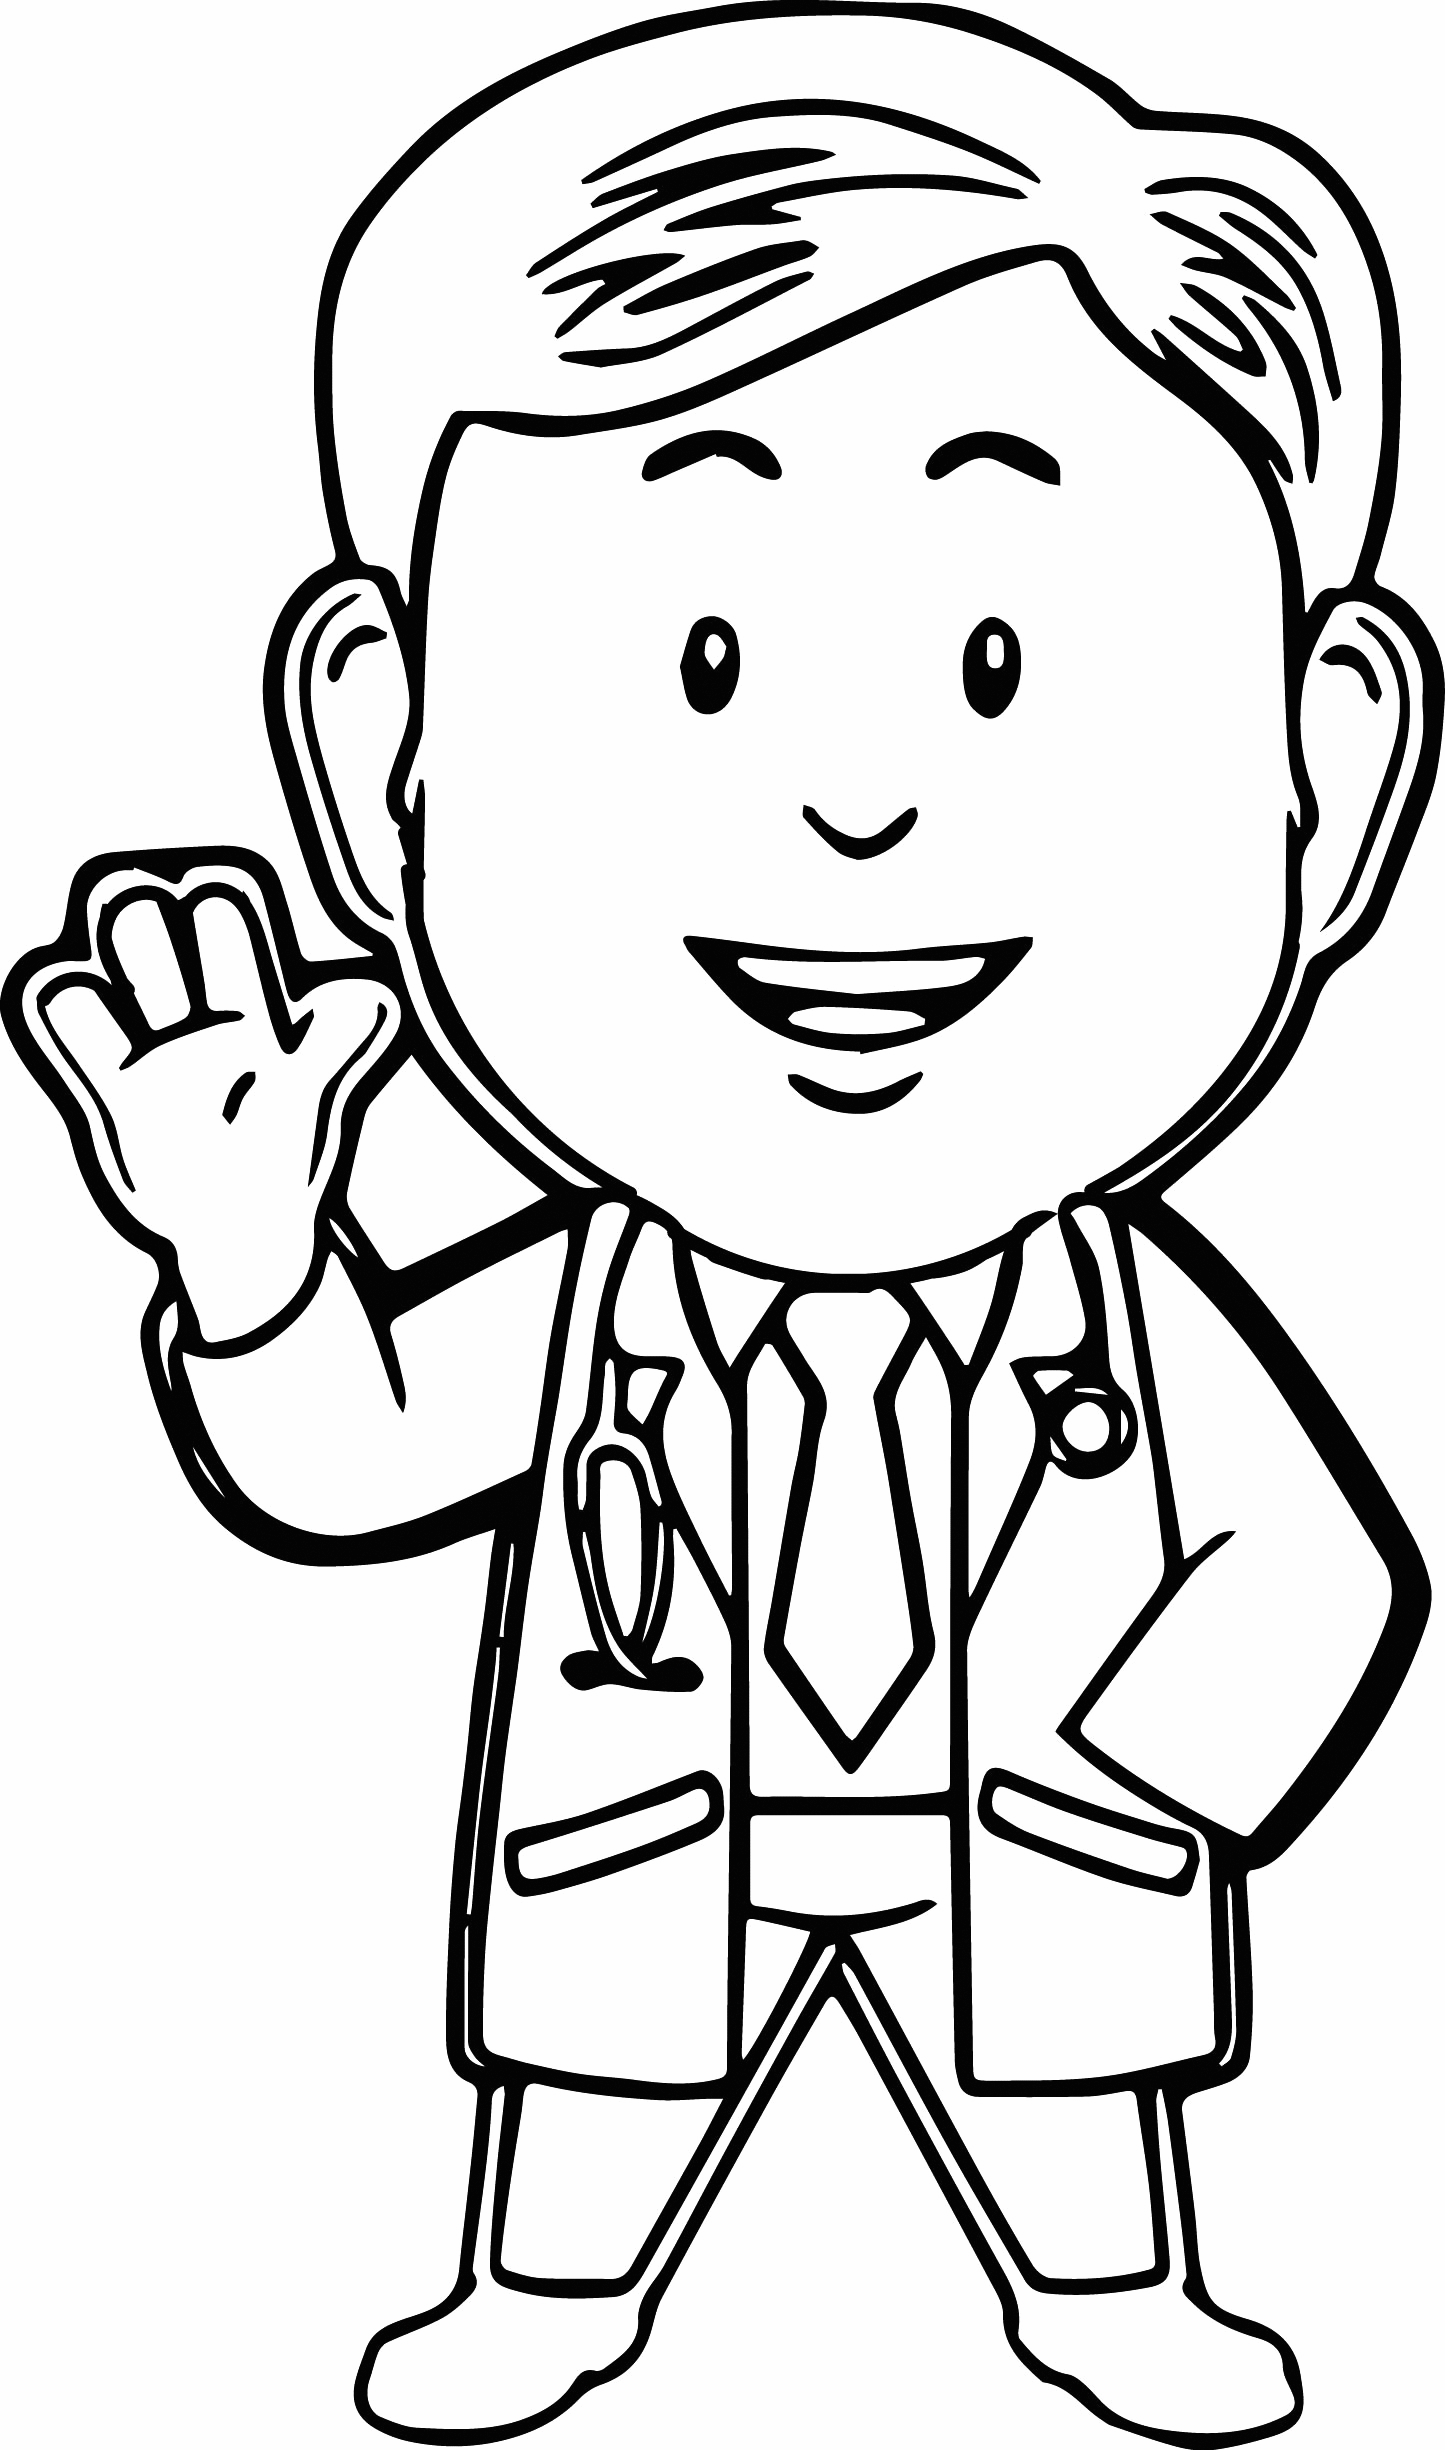 Doctor Characture Coloring Page